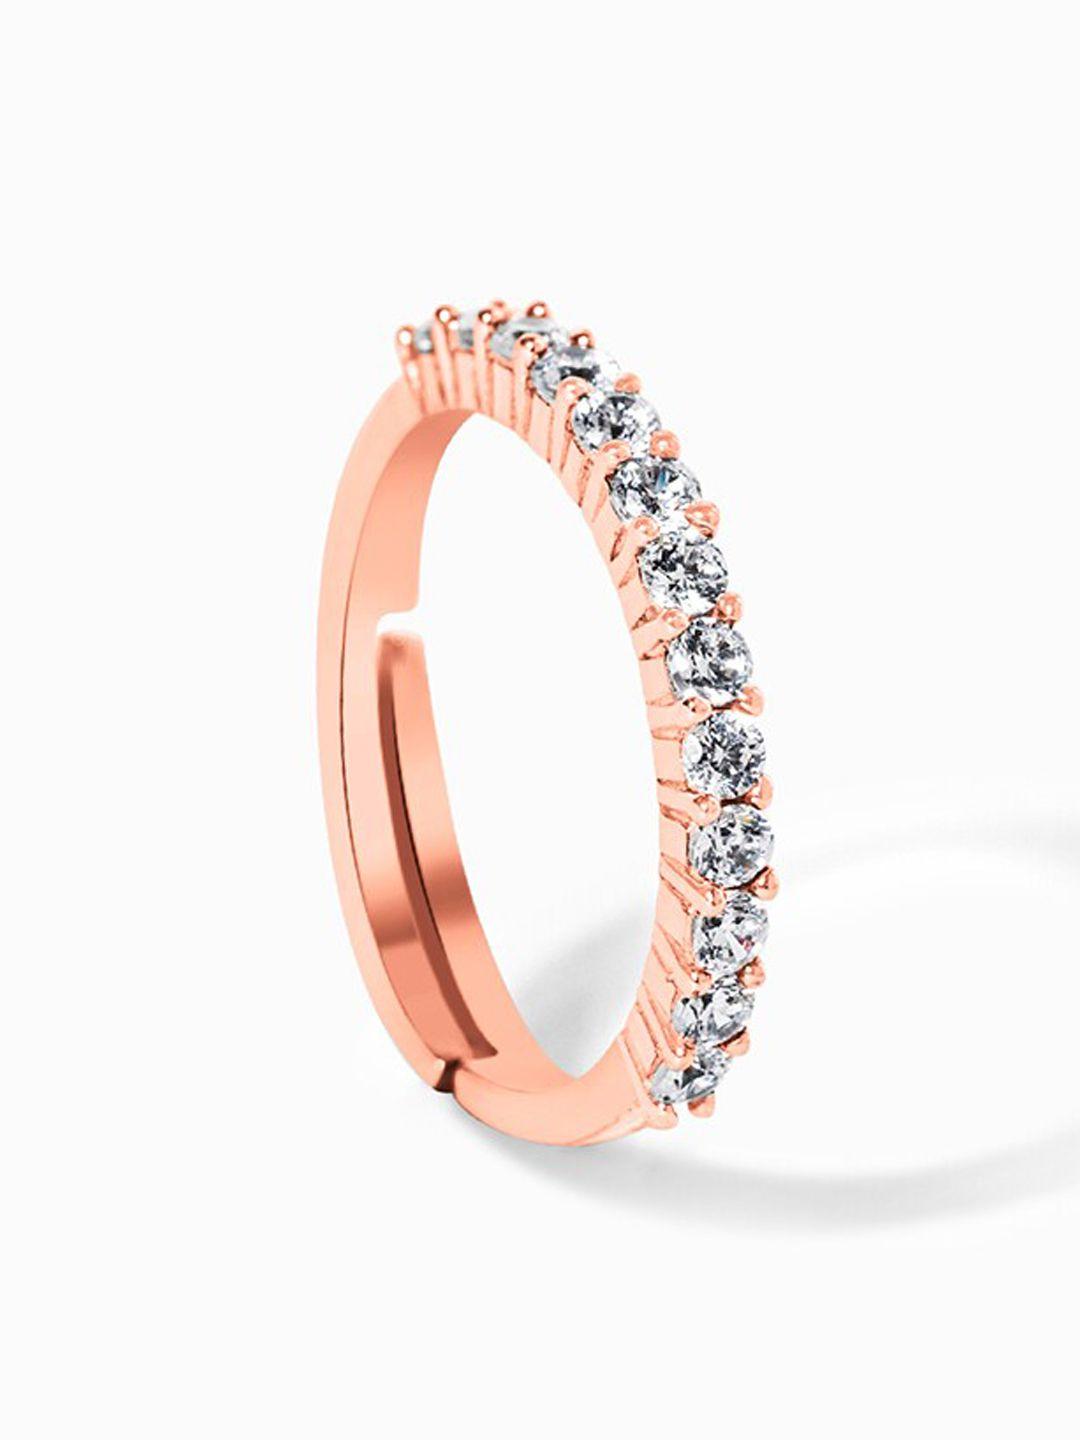 mikoto by fablestreet 925 sterling silver rose gold-toned half eternity ring